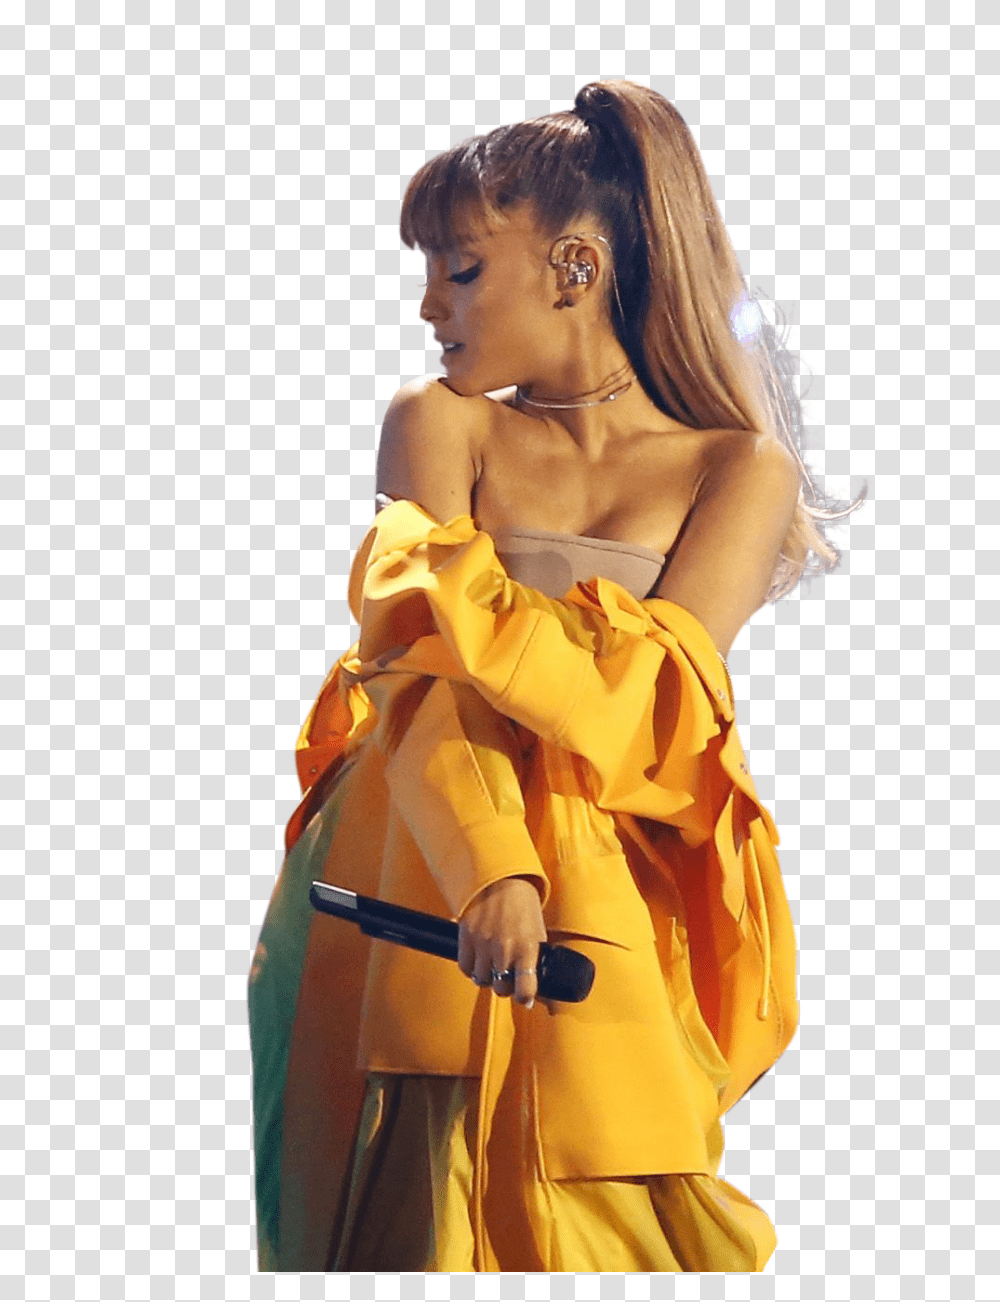 Download Ariana Grande In Yellow Dress Background Ariana Grande, Clothing, Apparel, Evening Dress, Robe Transparent Png